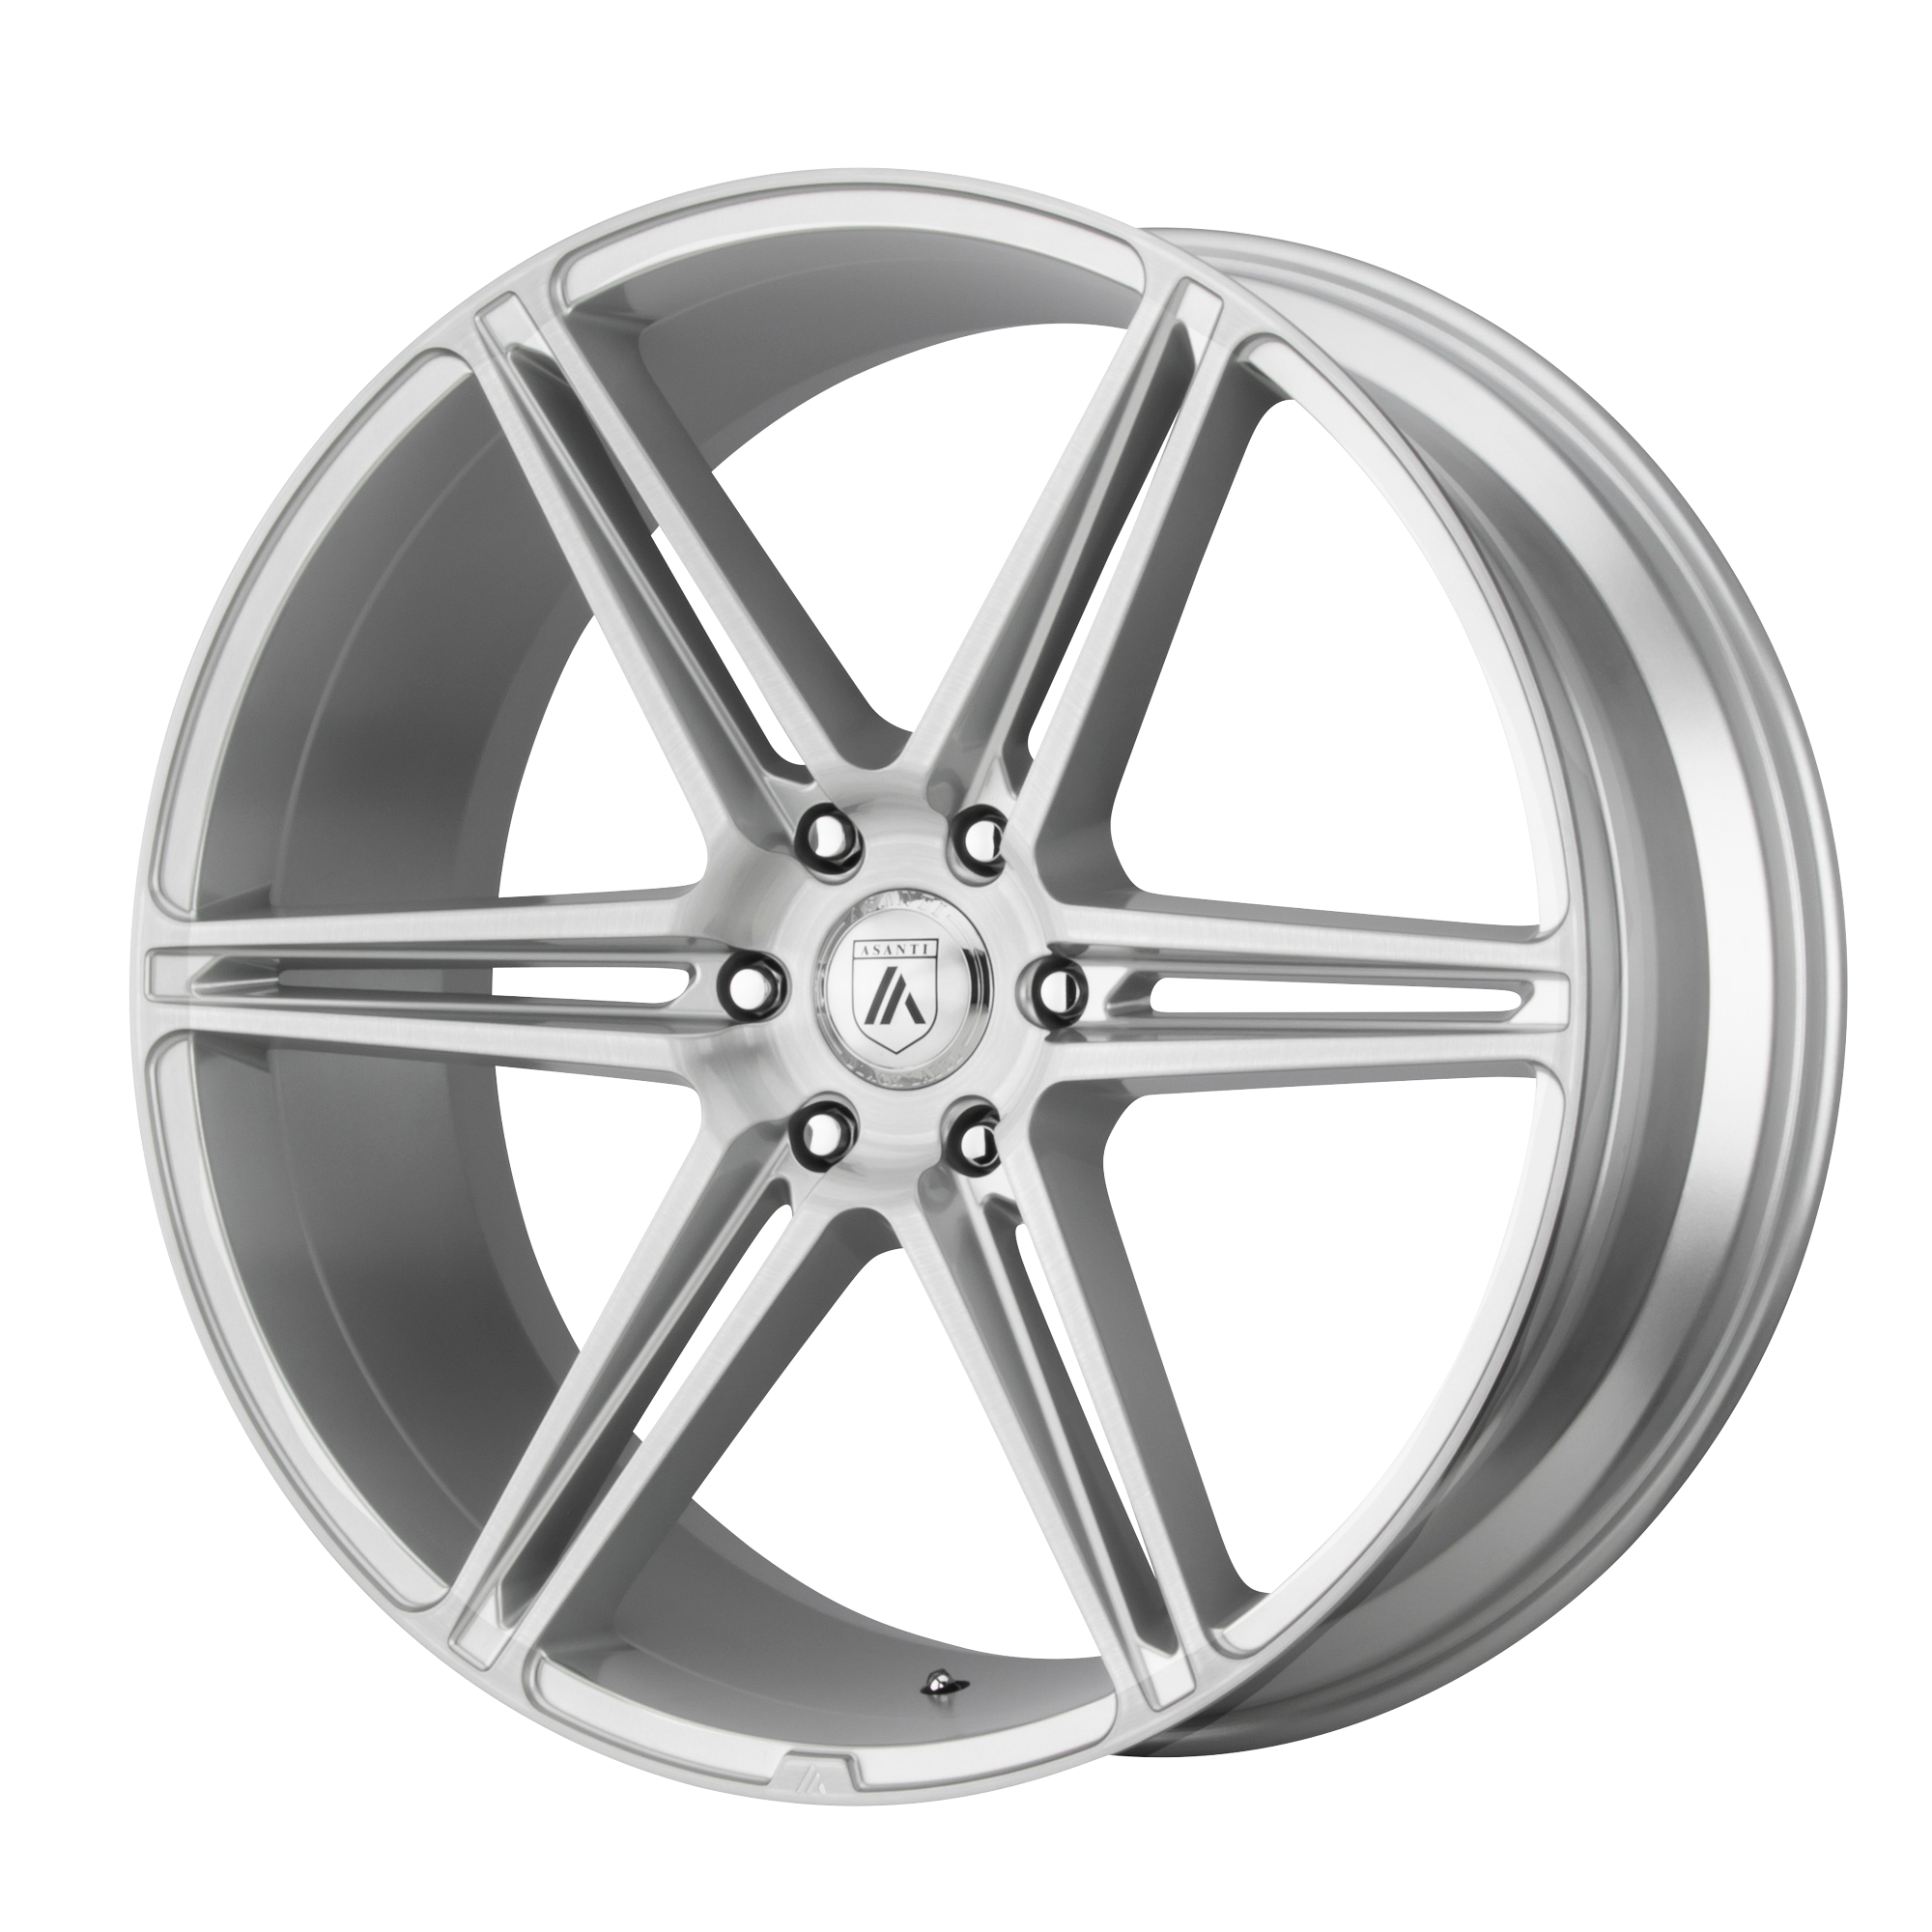 ALPHA 6 20x9 6x139.70 BRUSHED SILVER (30 mm) - Tires and Engine Performance